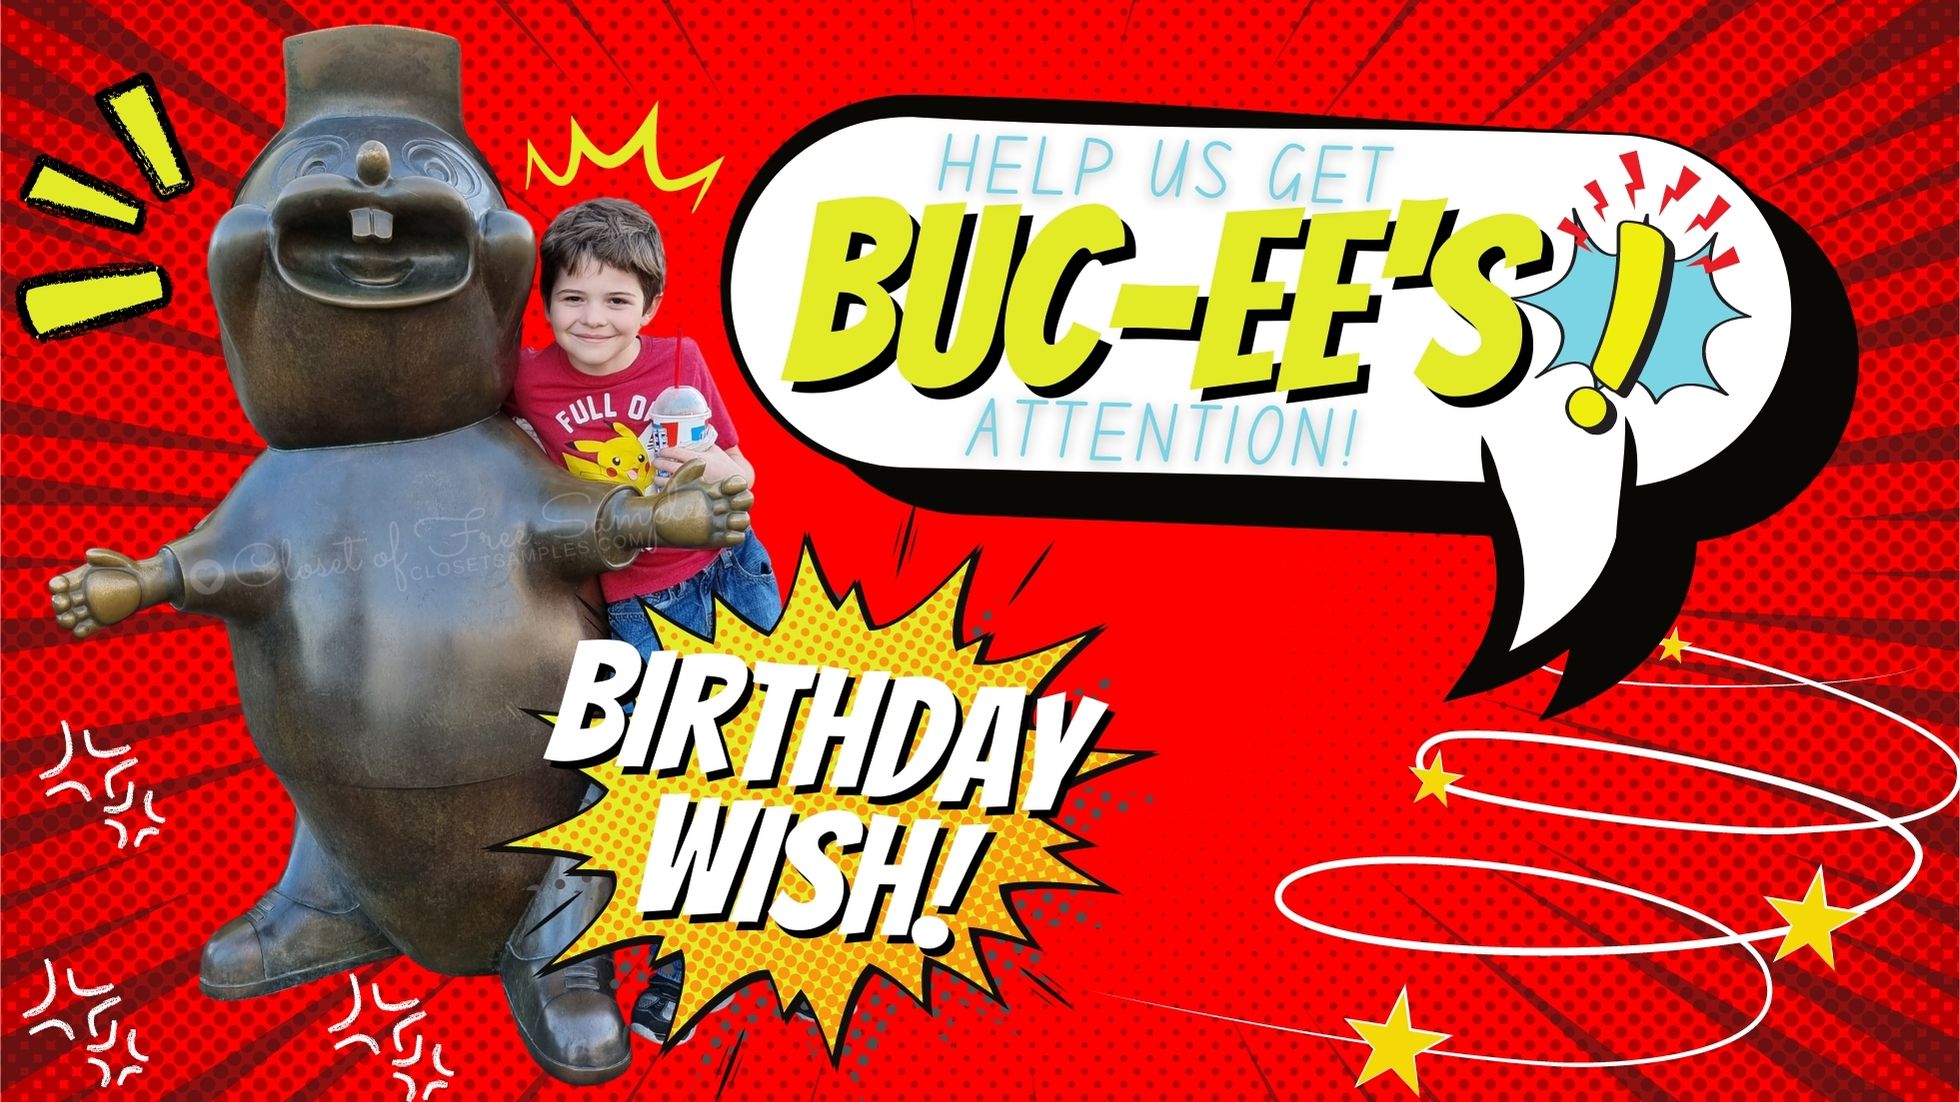 help us get bucees attention jace birthday wish 2023 closetsamples